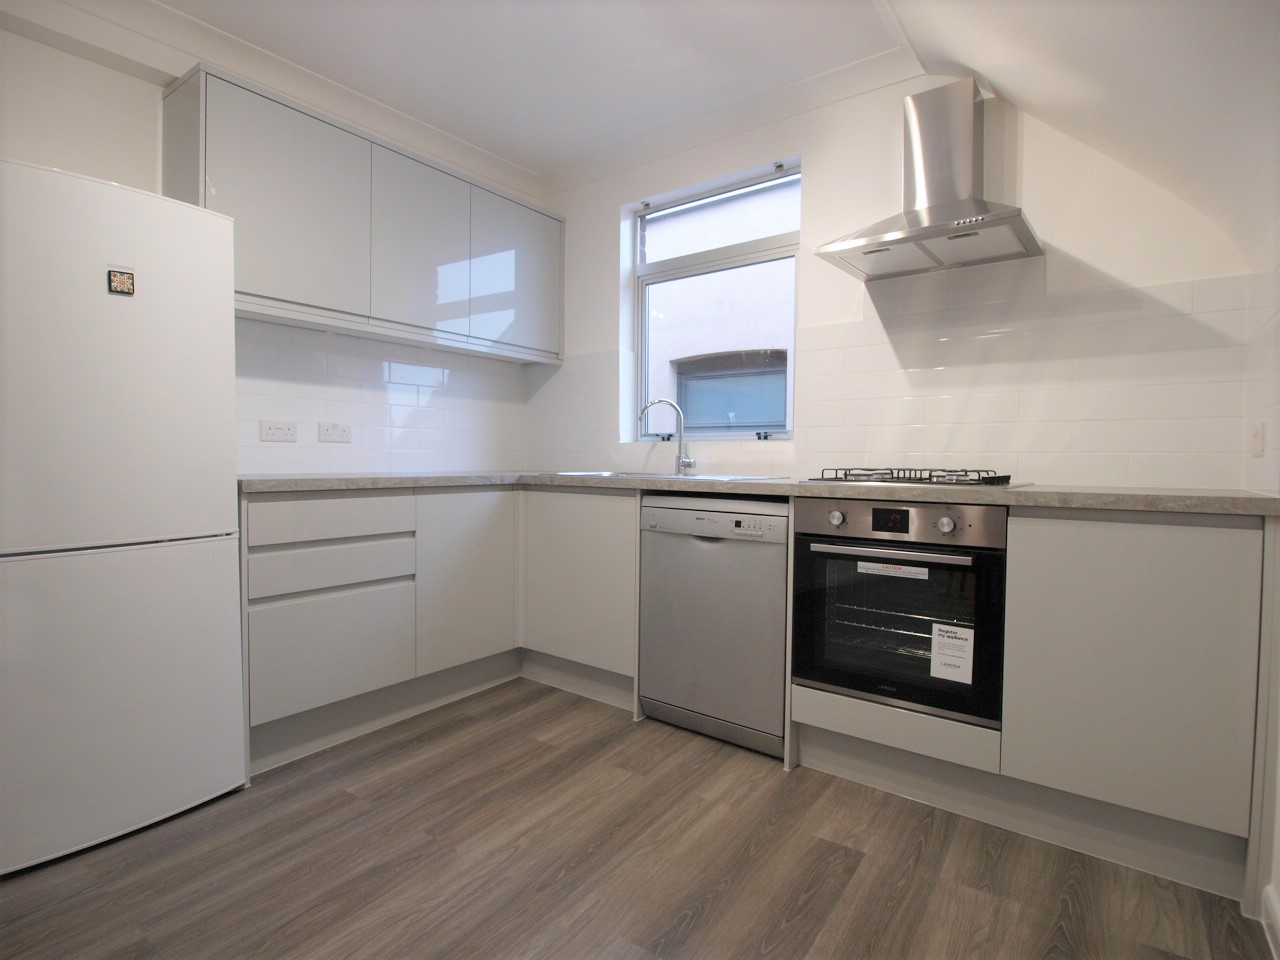 4 Bedroom Flat to rent in Crouch End, London, N8